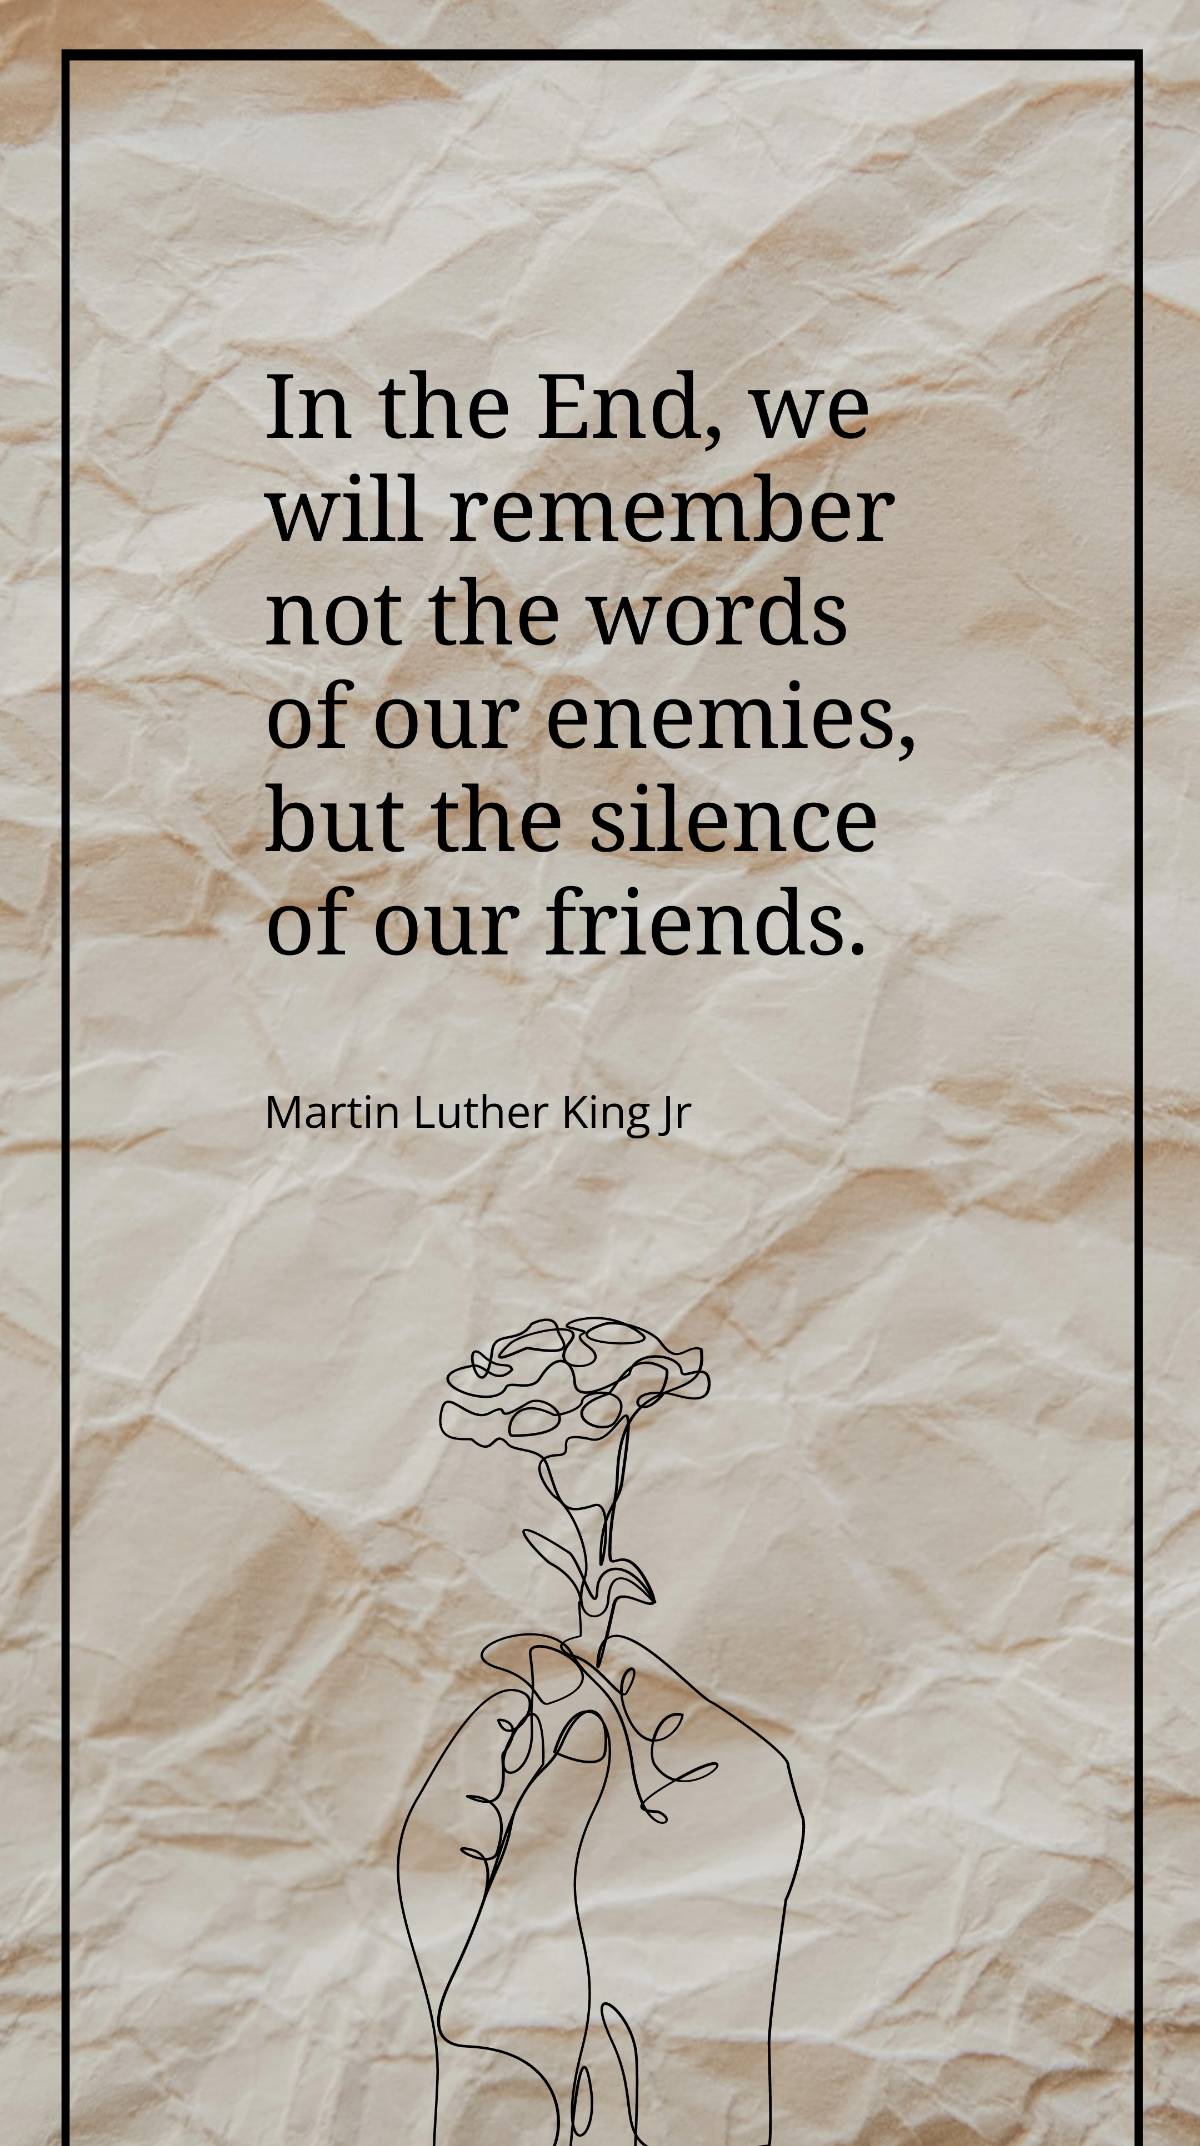 Martin Luther King Jr - "In the End, we will remember not the words of our enemies, but the silence of our friends.”